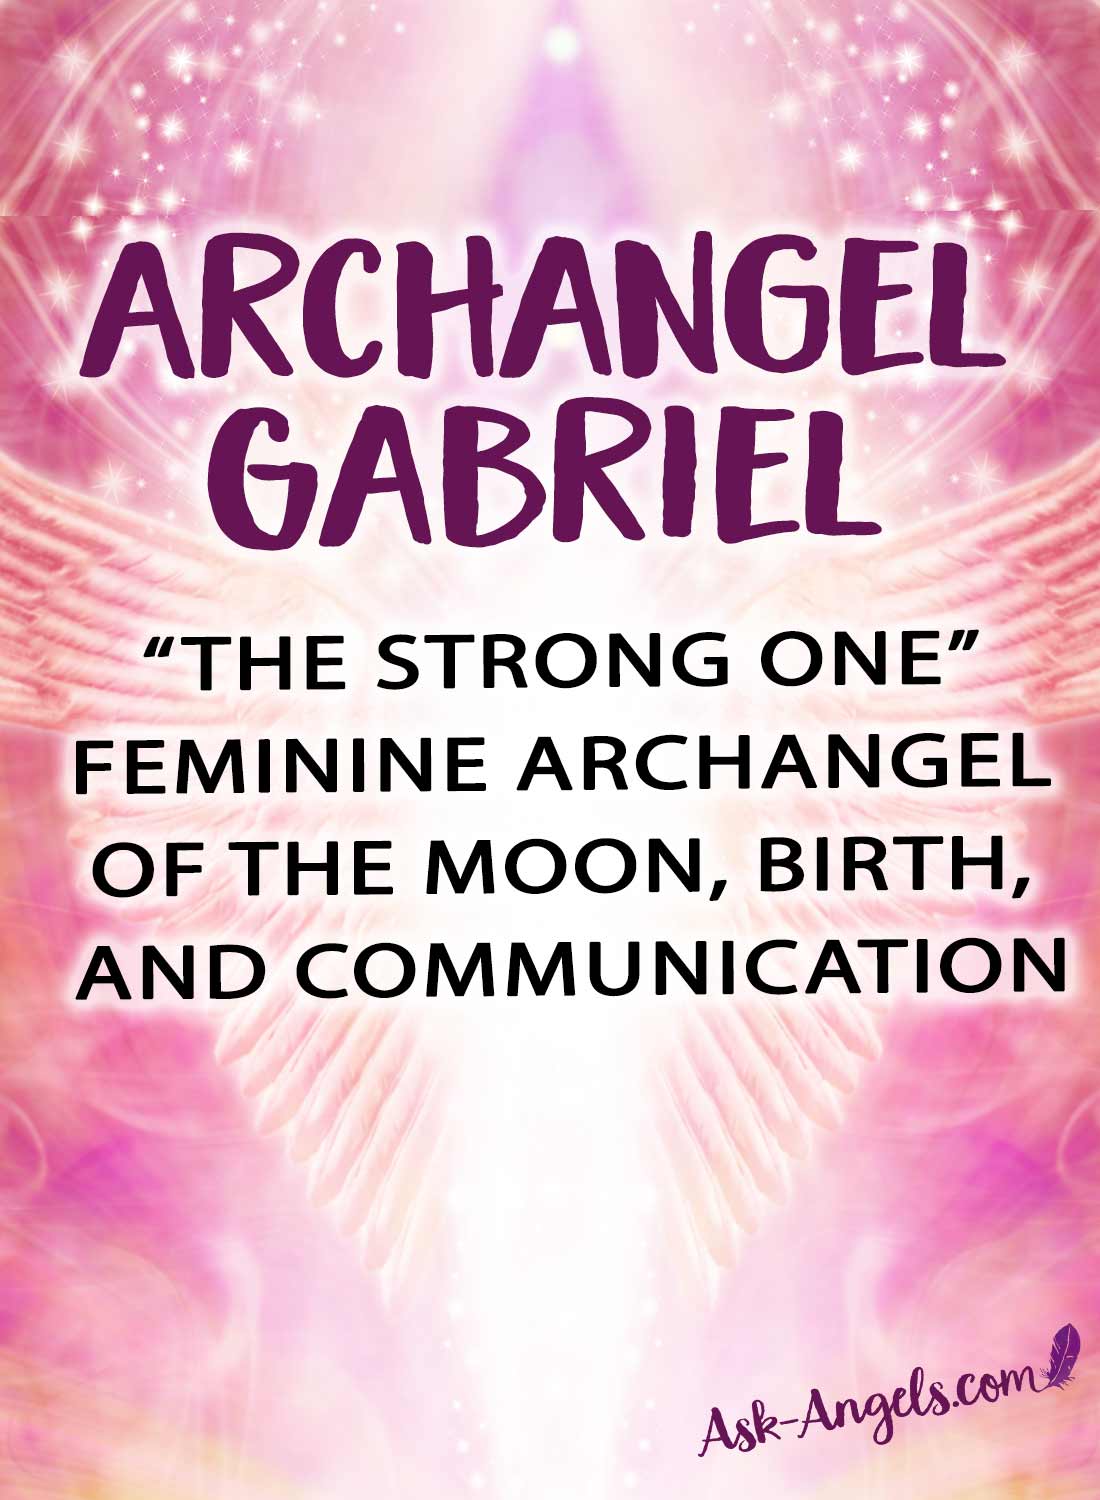 Archangel Gabriel is the feminine archangel of the moon, birth and communication. Learn more!